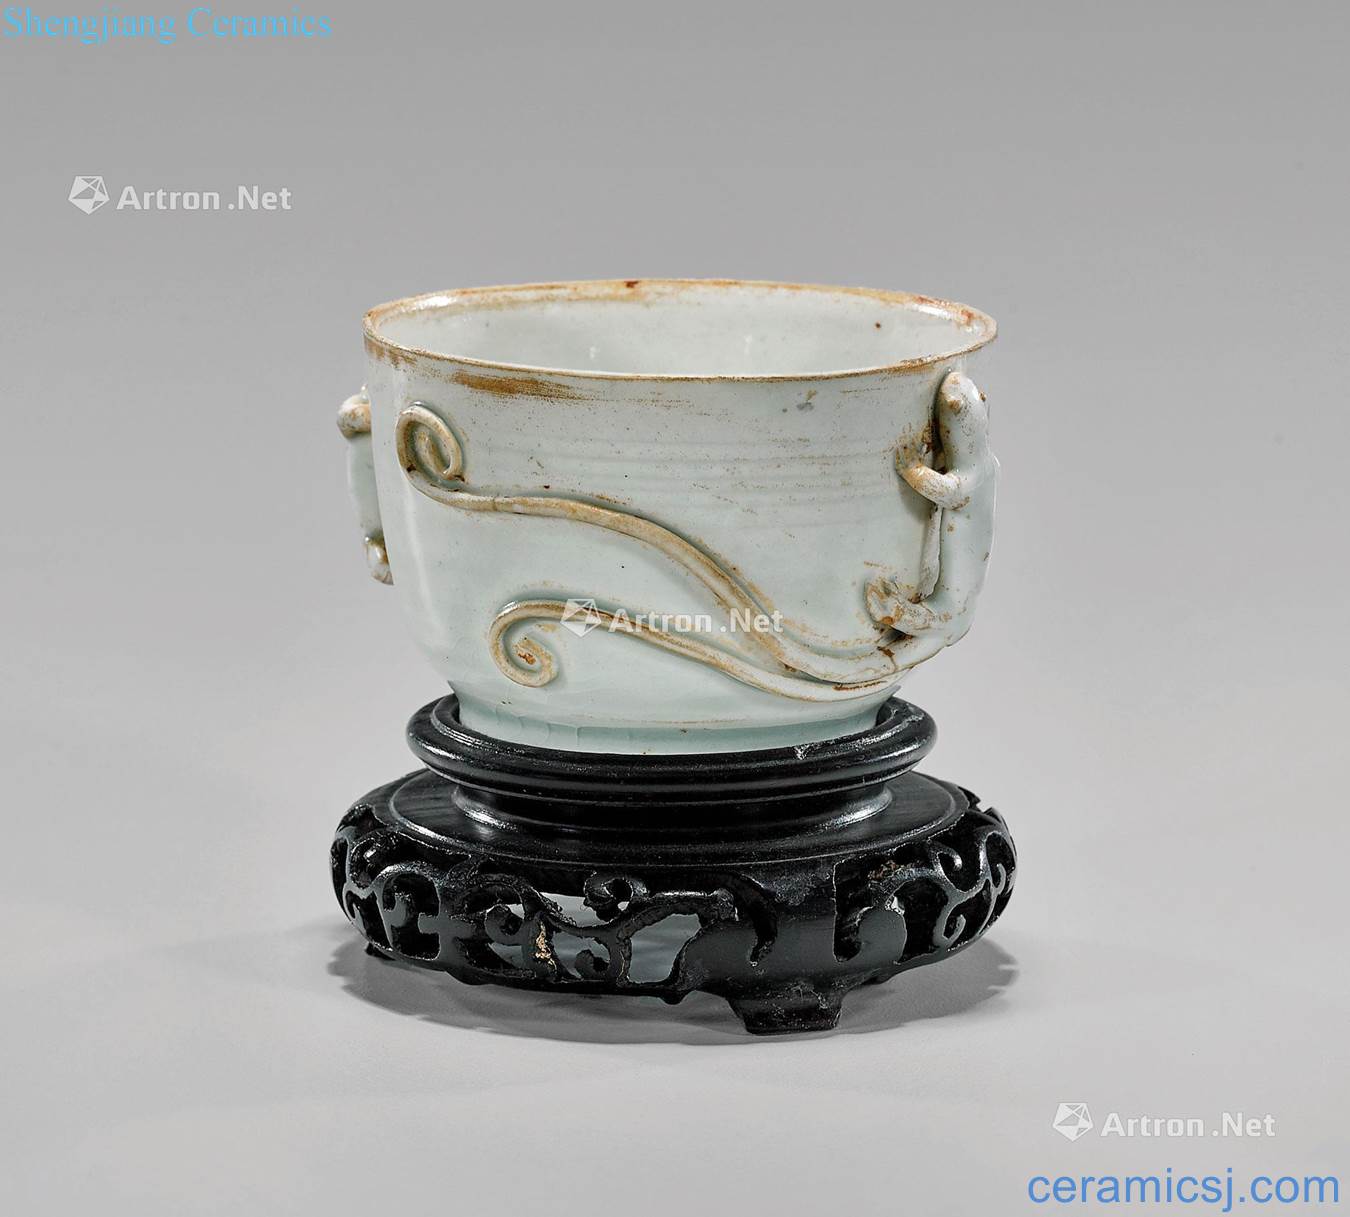 The song dynasty blue white glaze cup